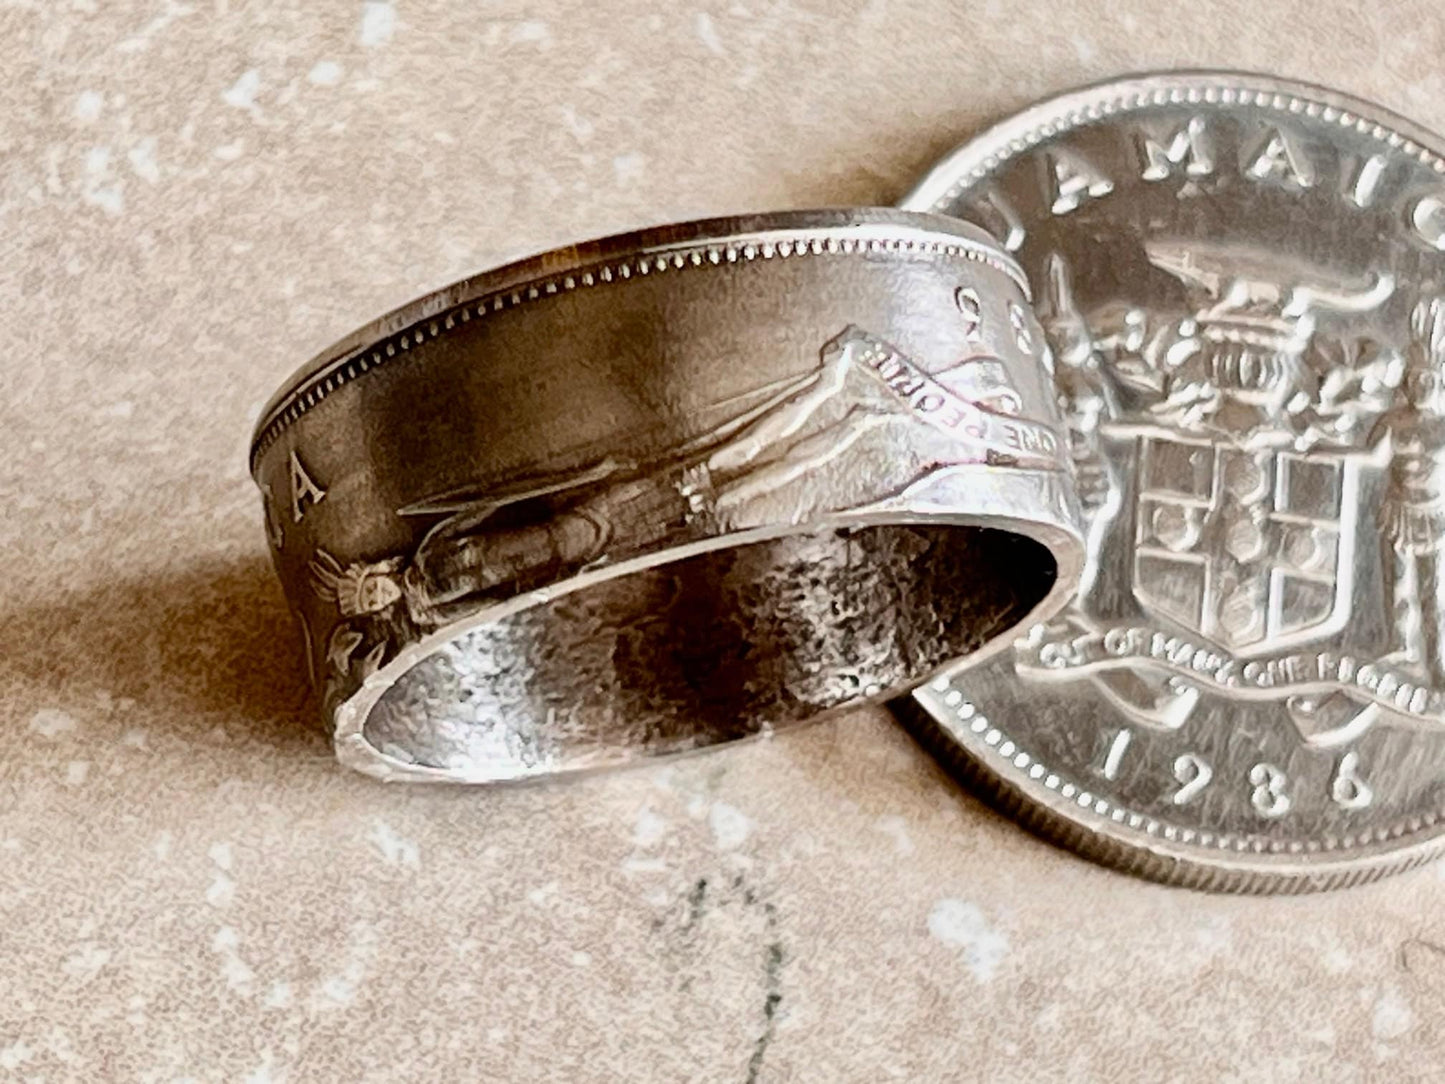 Jamaica Coin Ring 20 Cent Jamaican Handmade Personal Charm Jewelry Ring Gift For Friend Coin Ring Gift For Him Her World Coin Collector